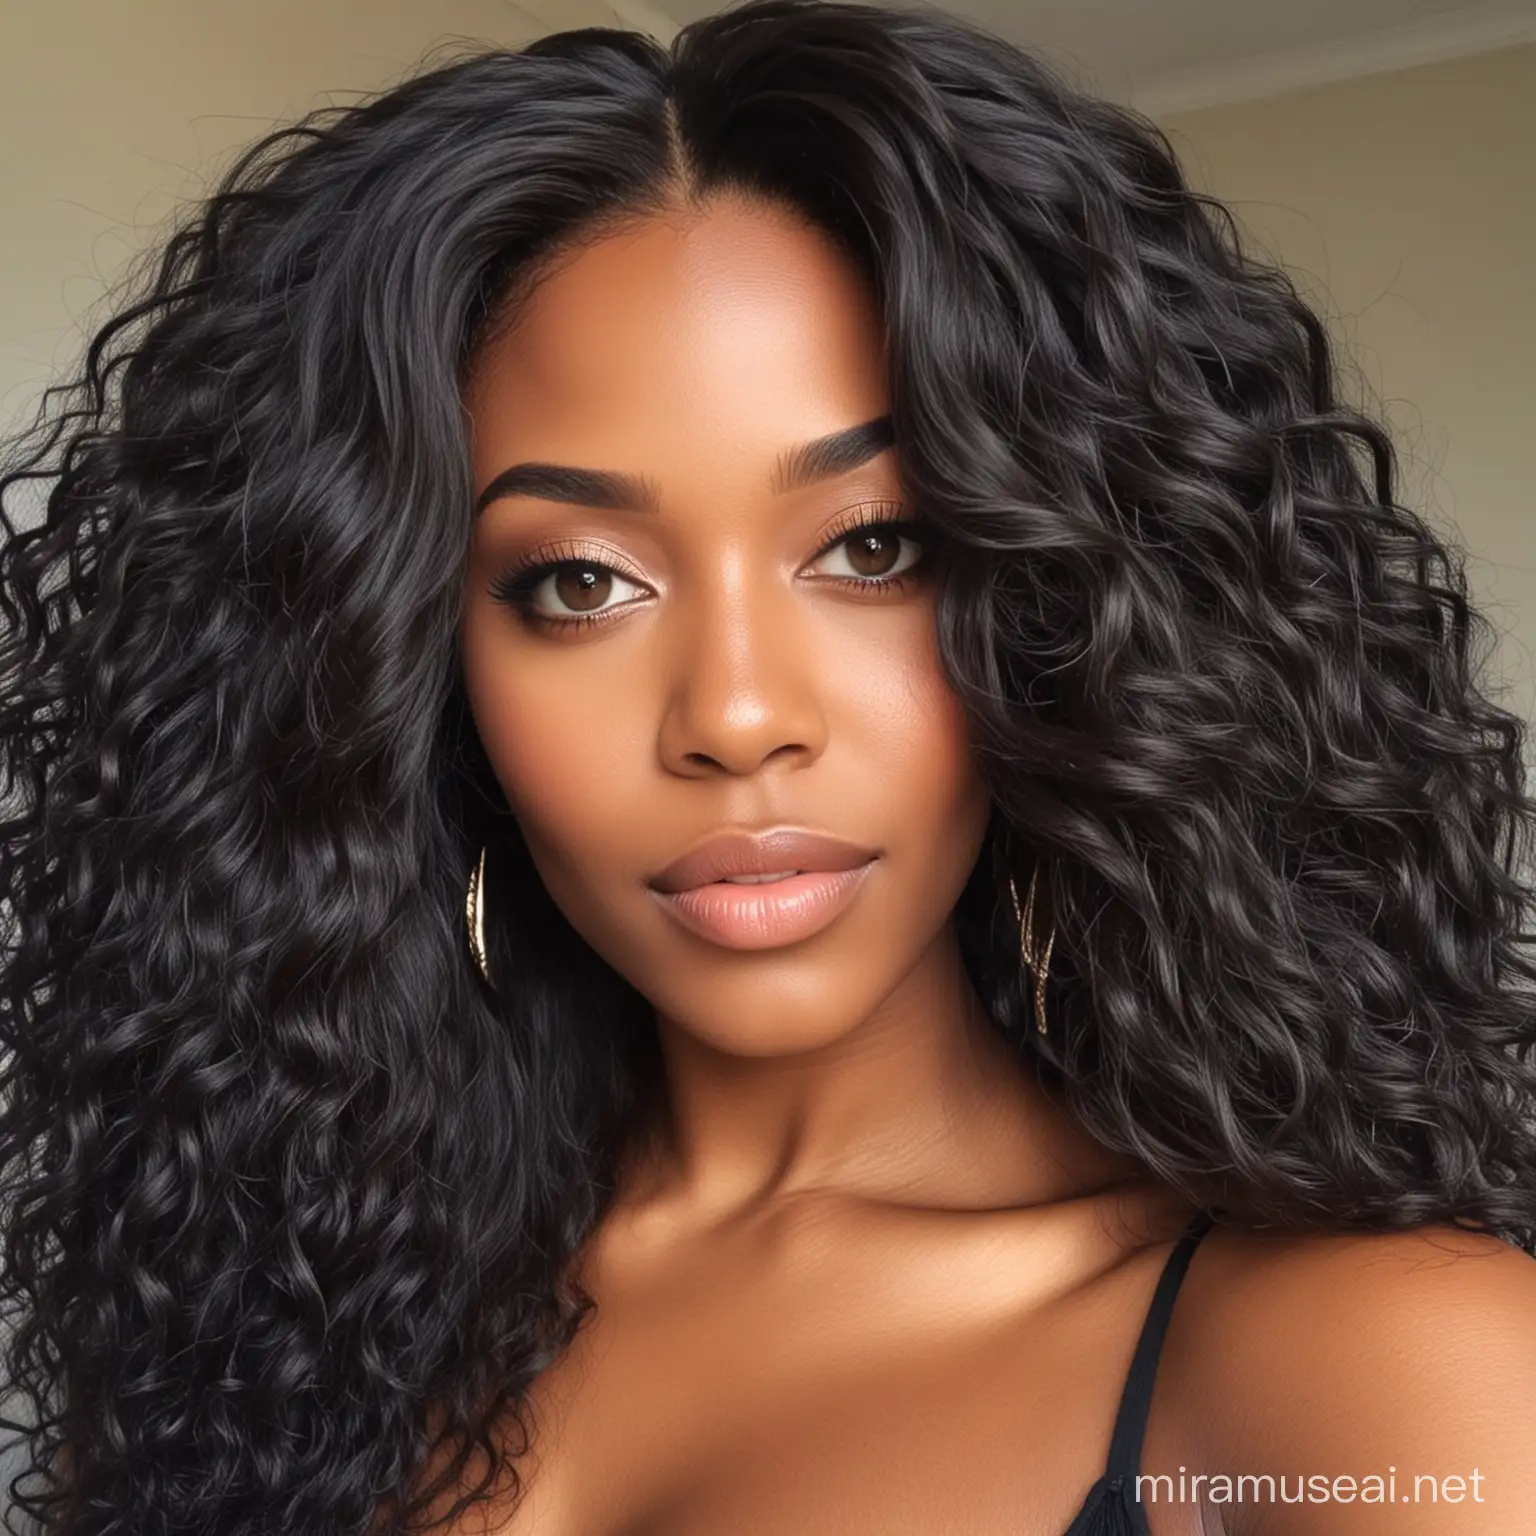 Elegant Black Women with Luxurious Long Hair in Natural Setting